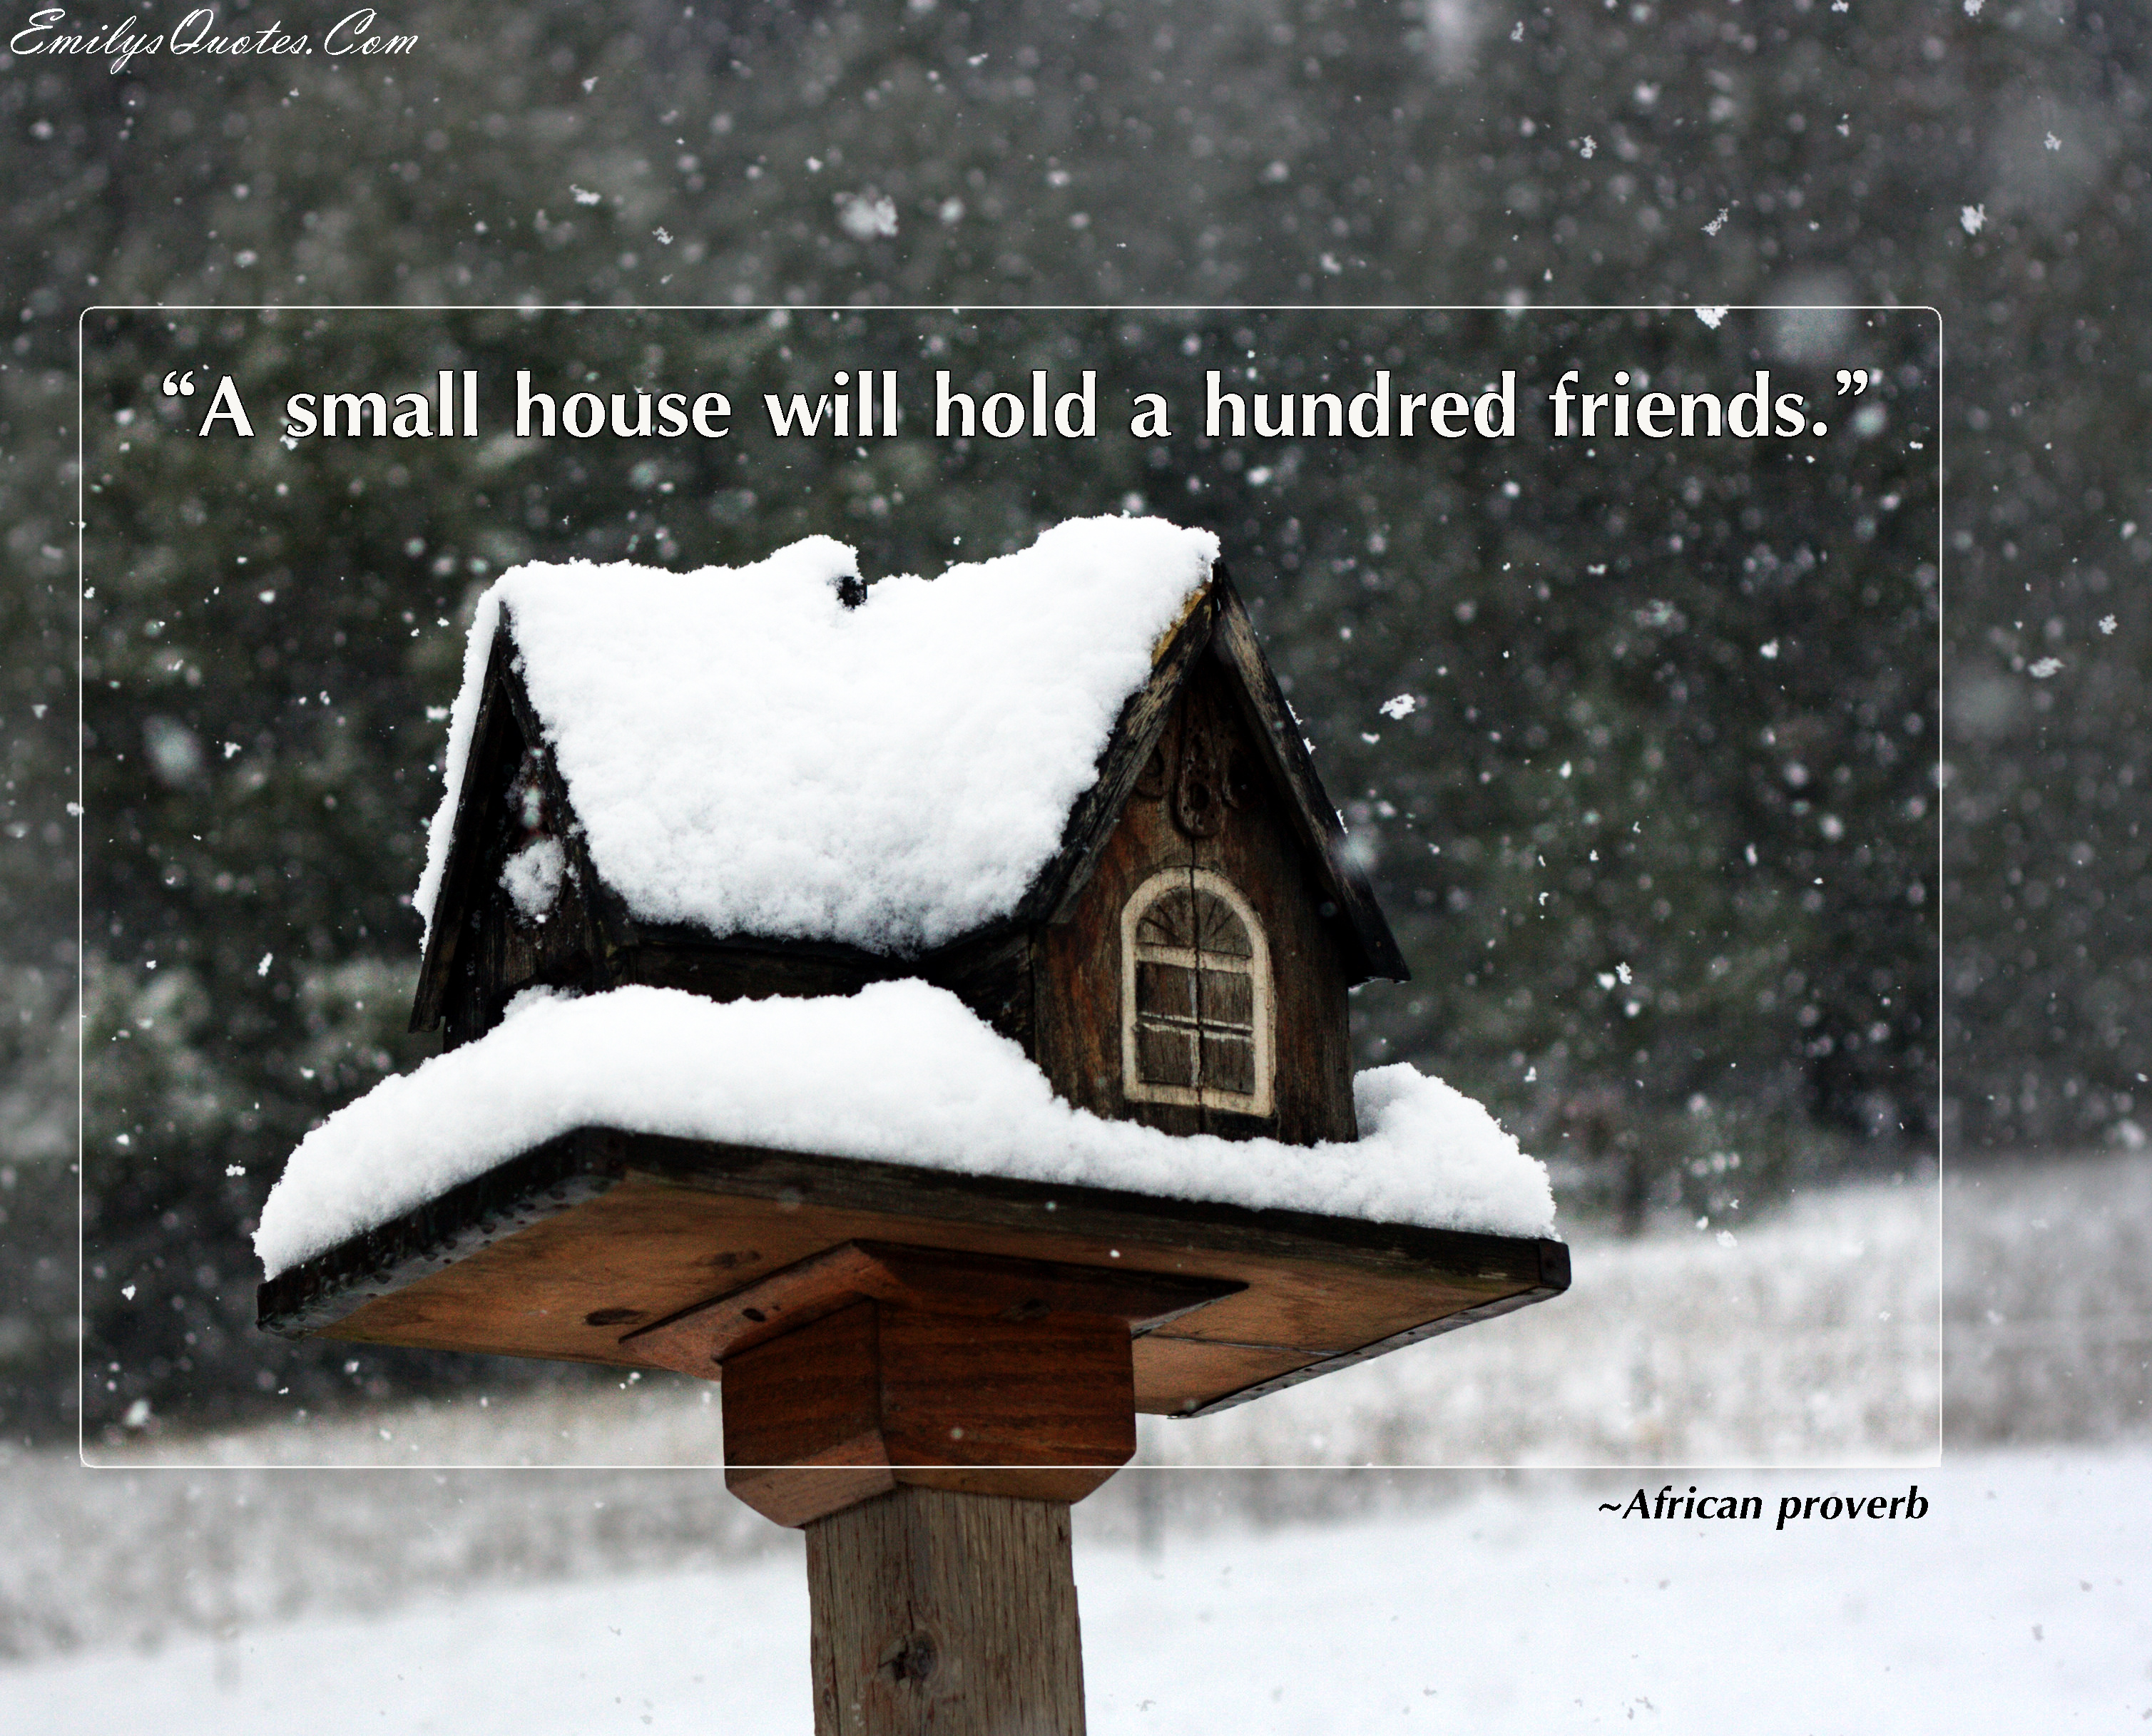 A small house will hold a hundred friends